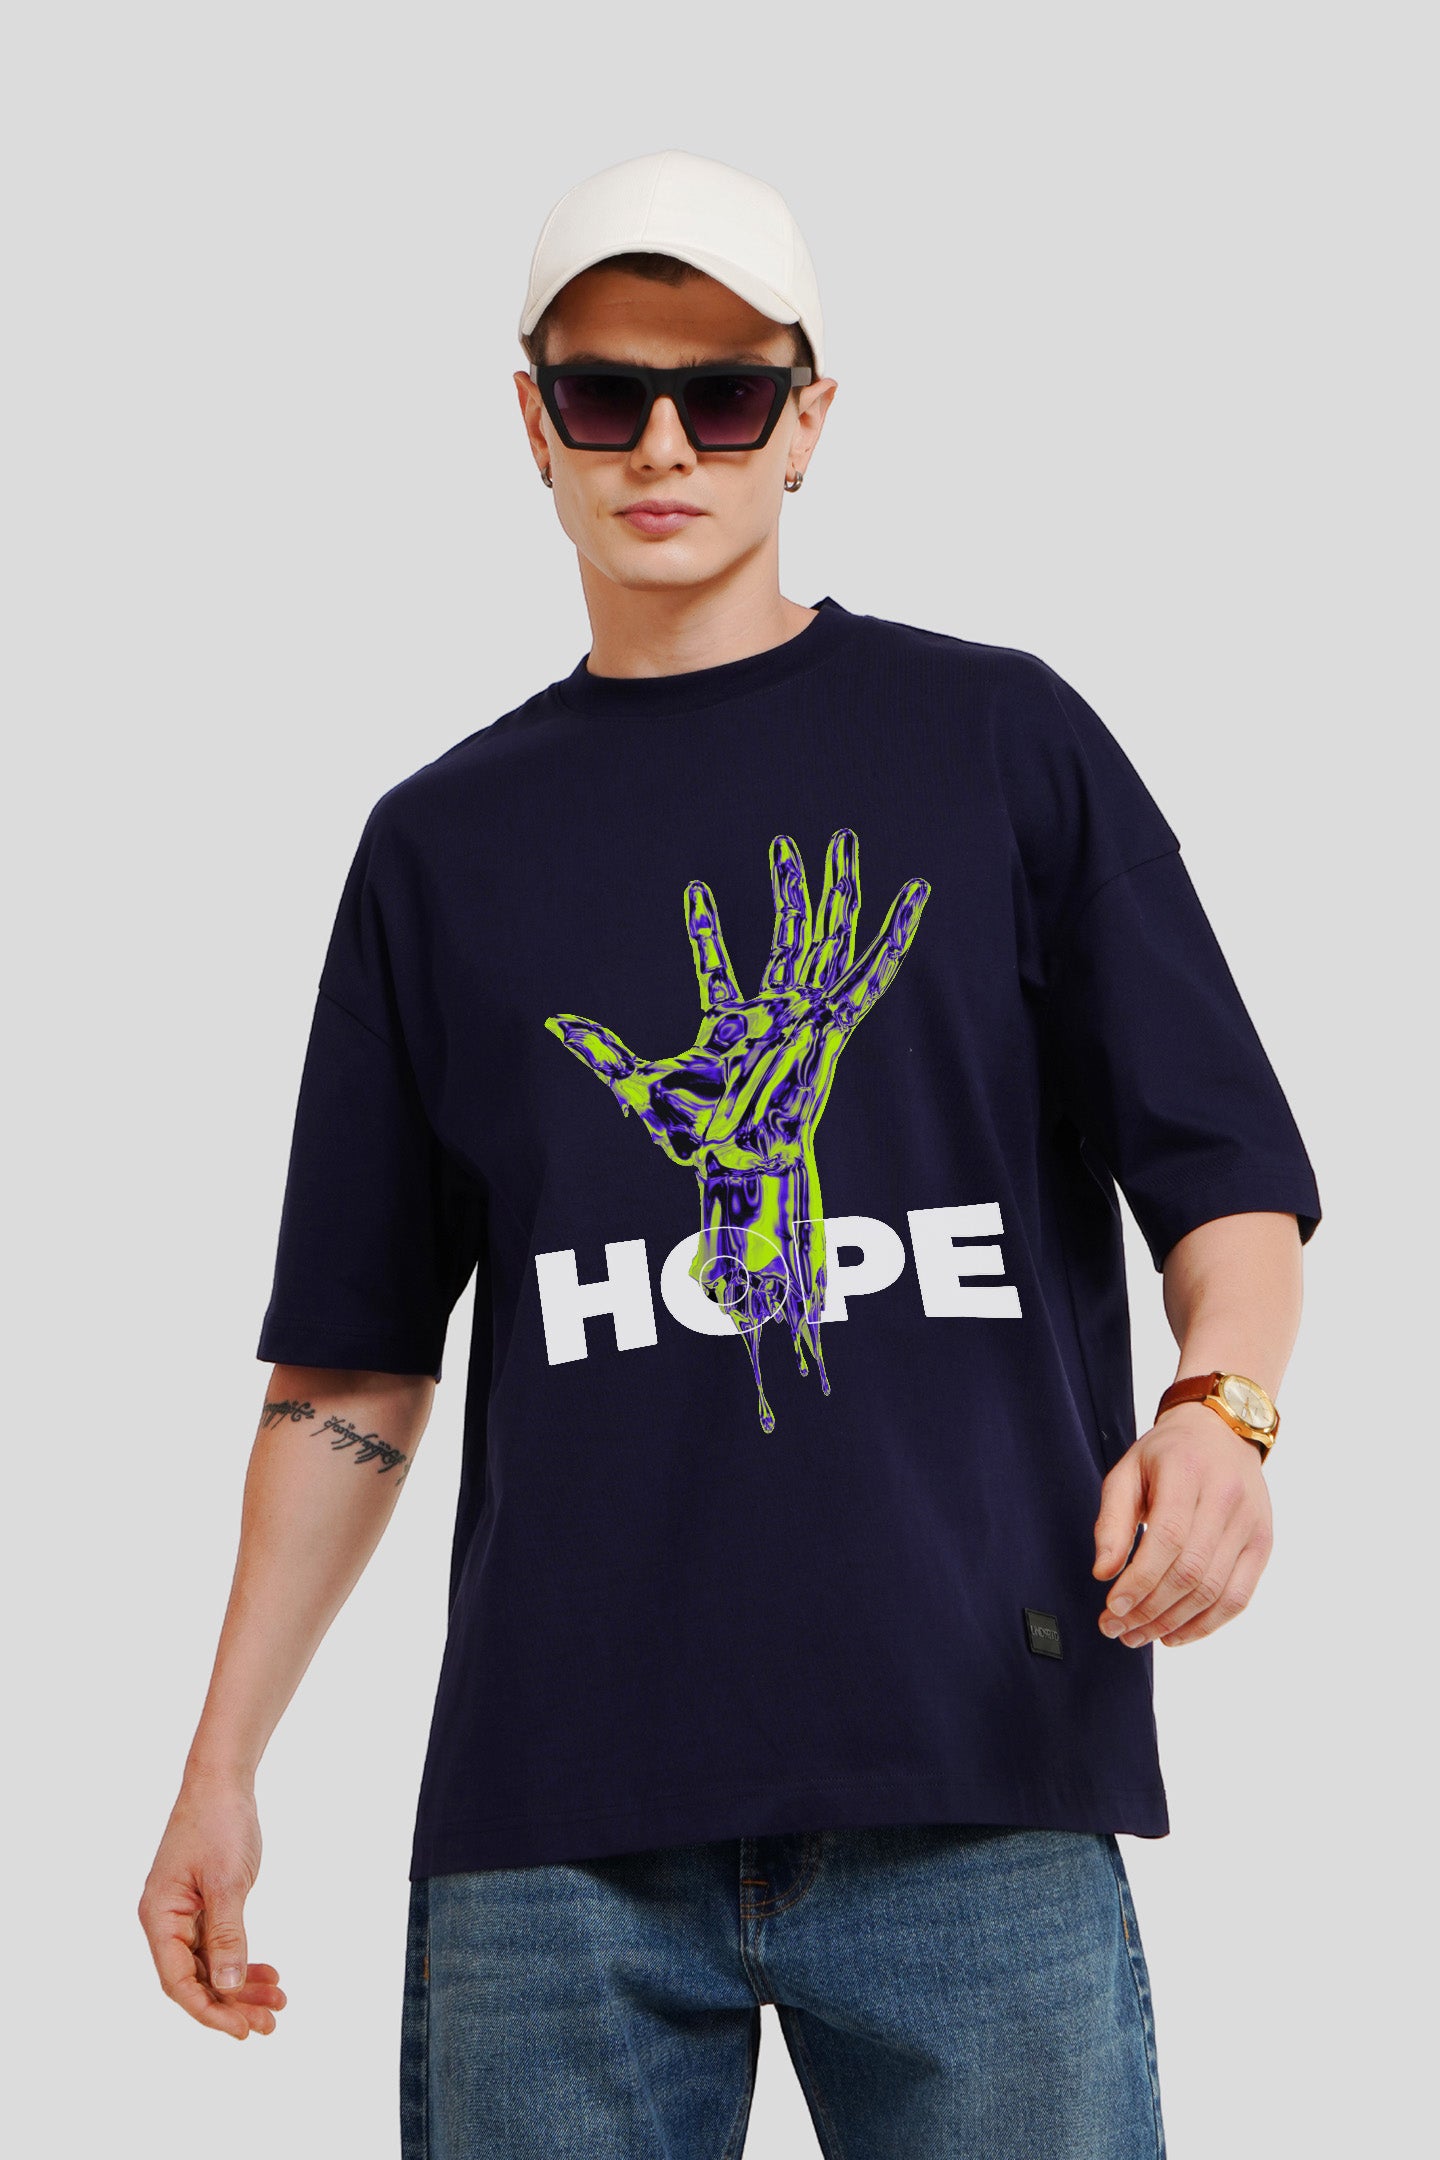 Hope Navy Blue Printed T Shirt Men Baggy Fit With Front Design Pic 1